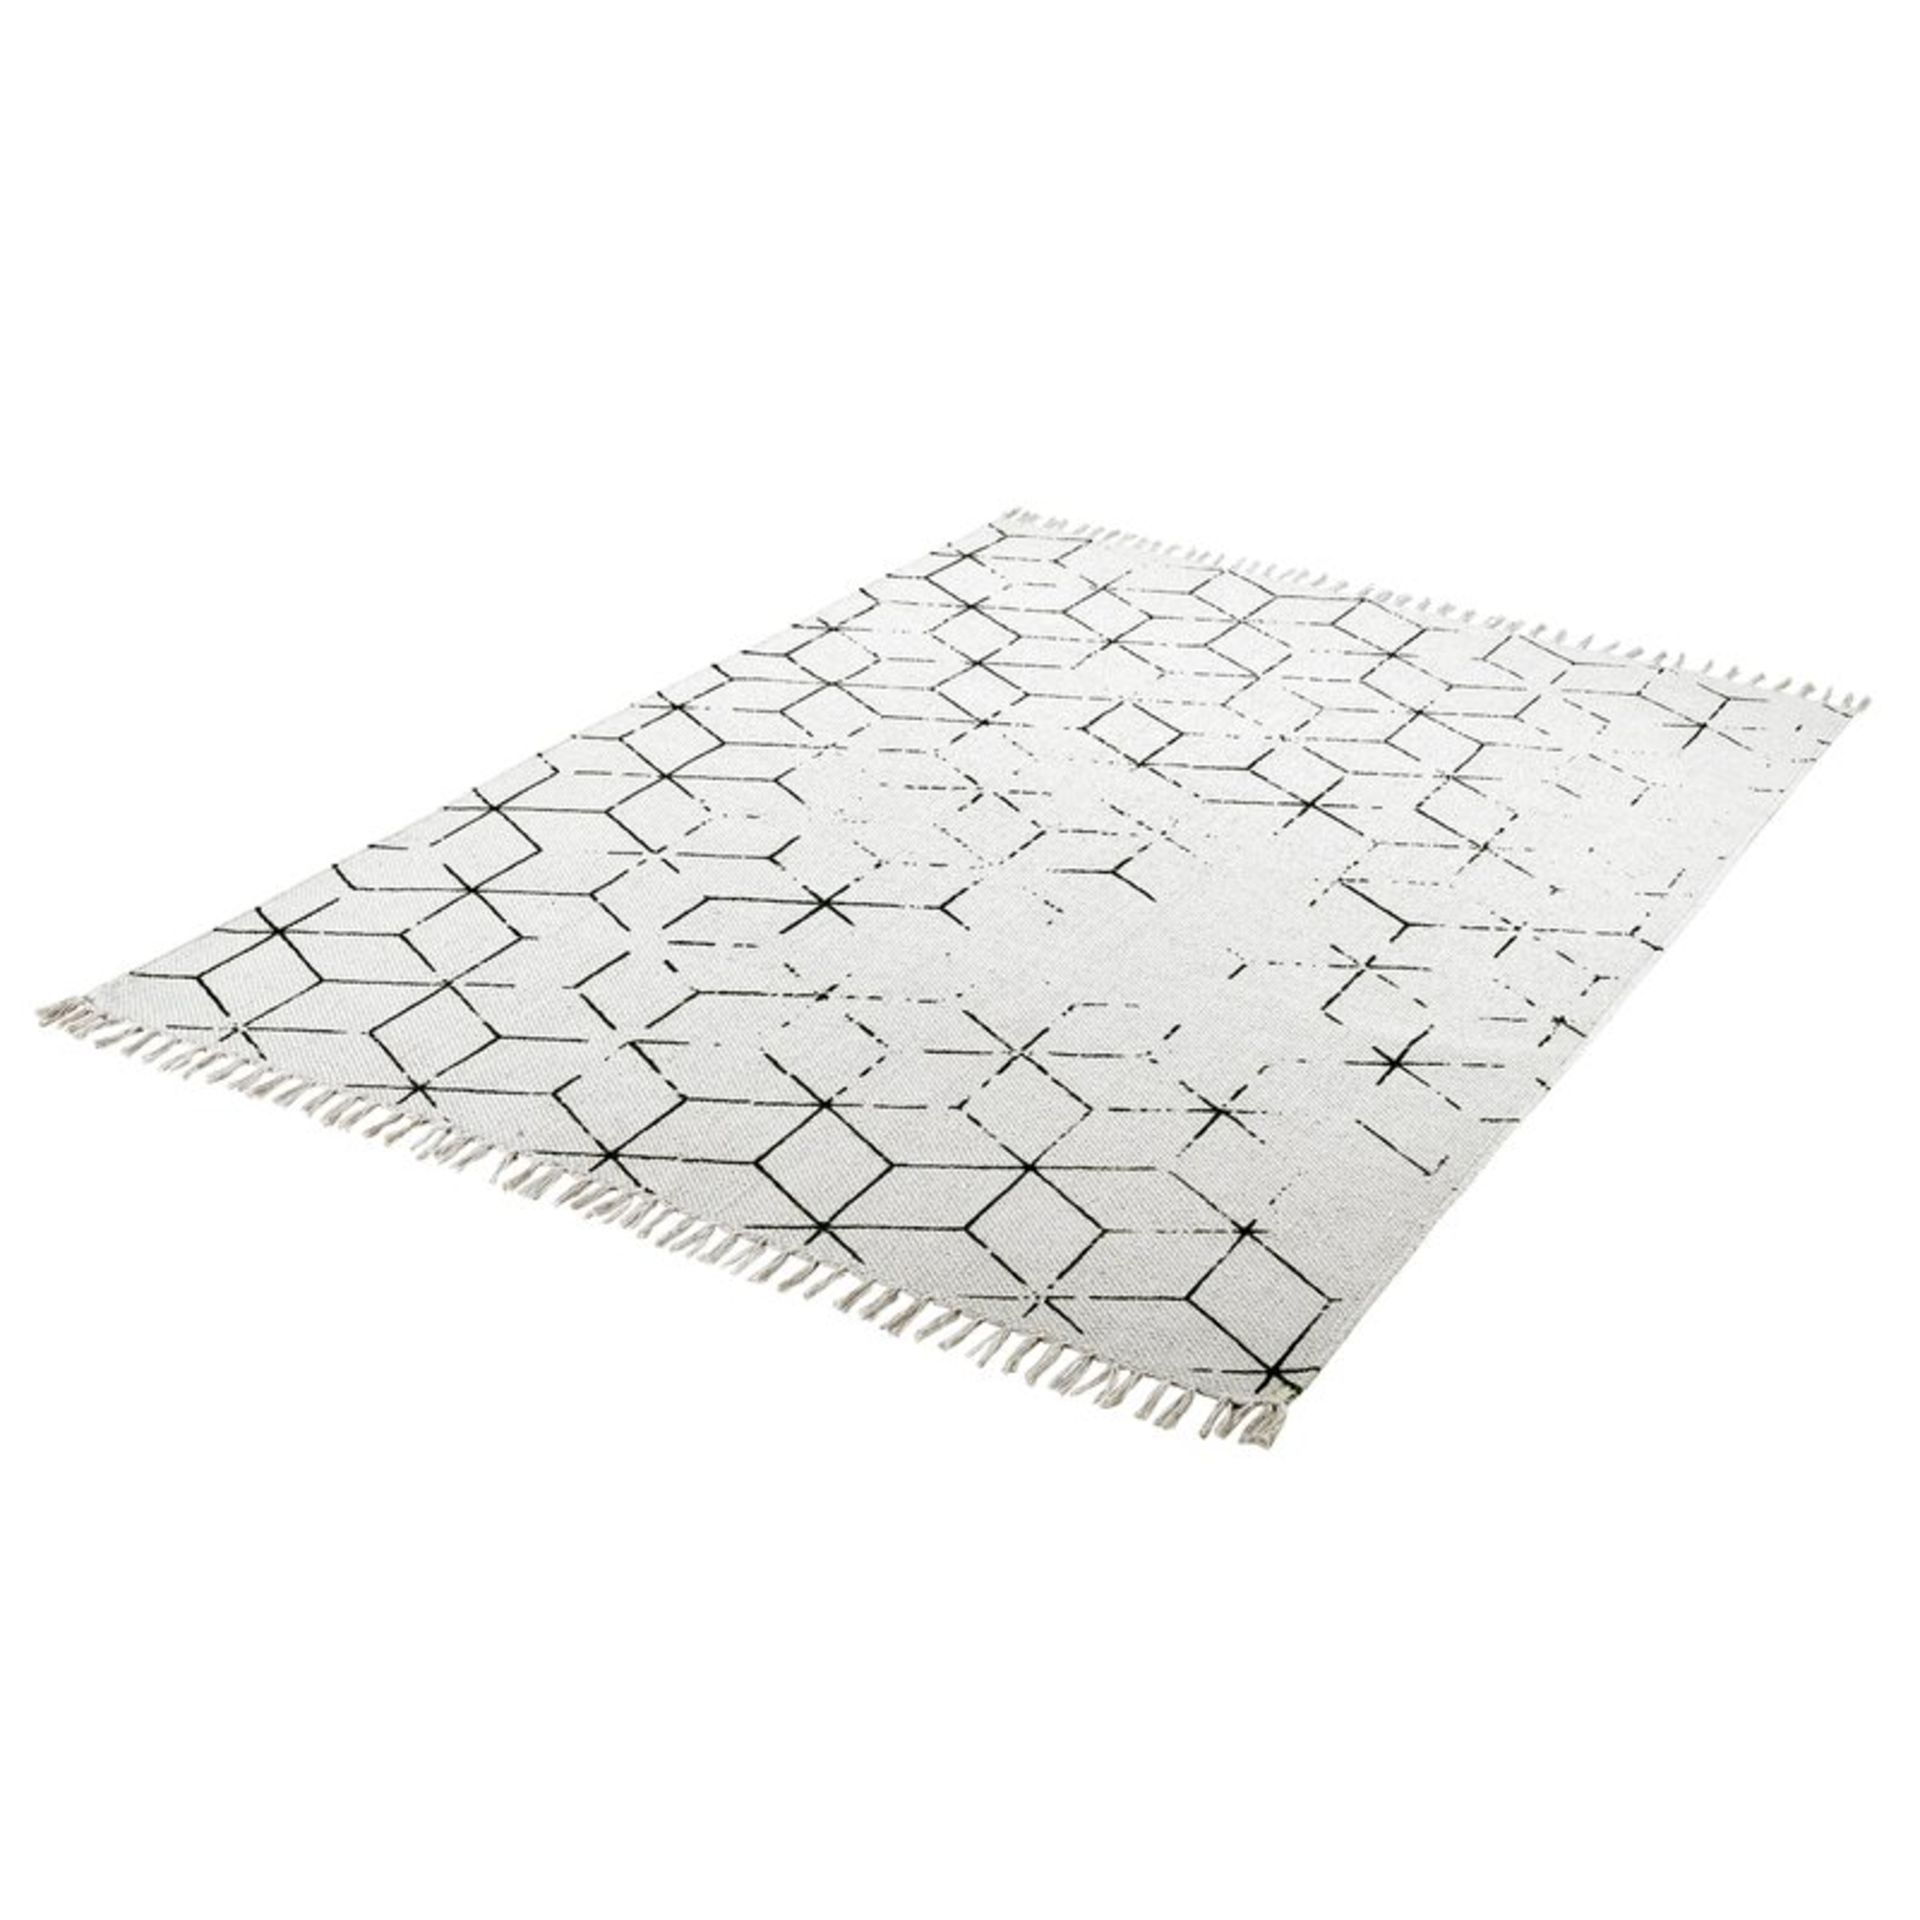 Castle Handwoven Flatweave Cotton Grey Rug by Borough Wharf - Image 2 of 3